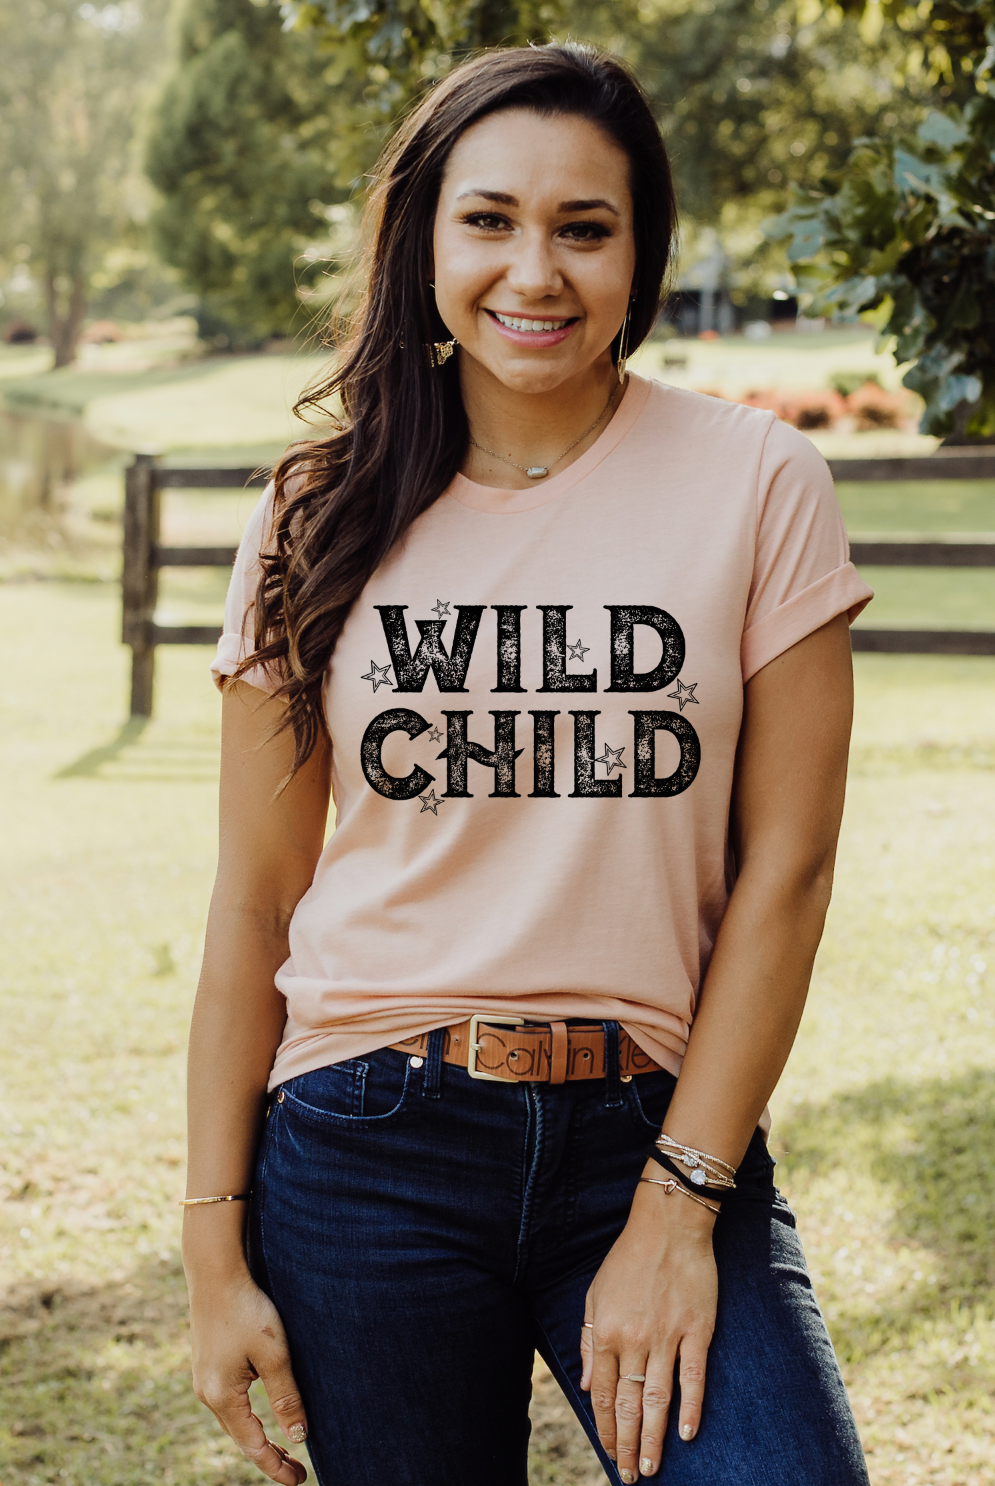 Wild Child Vintage Country Western Unisex Tshirt on Bella and Canvas Shirt in Peach.